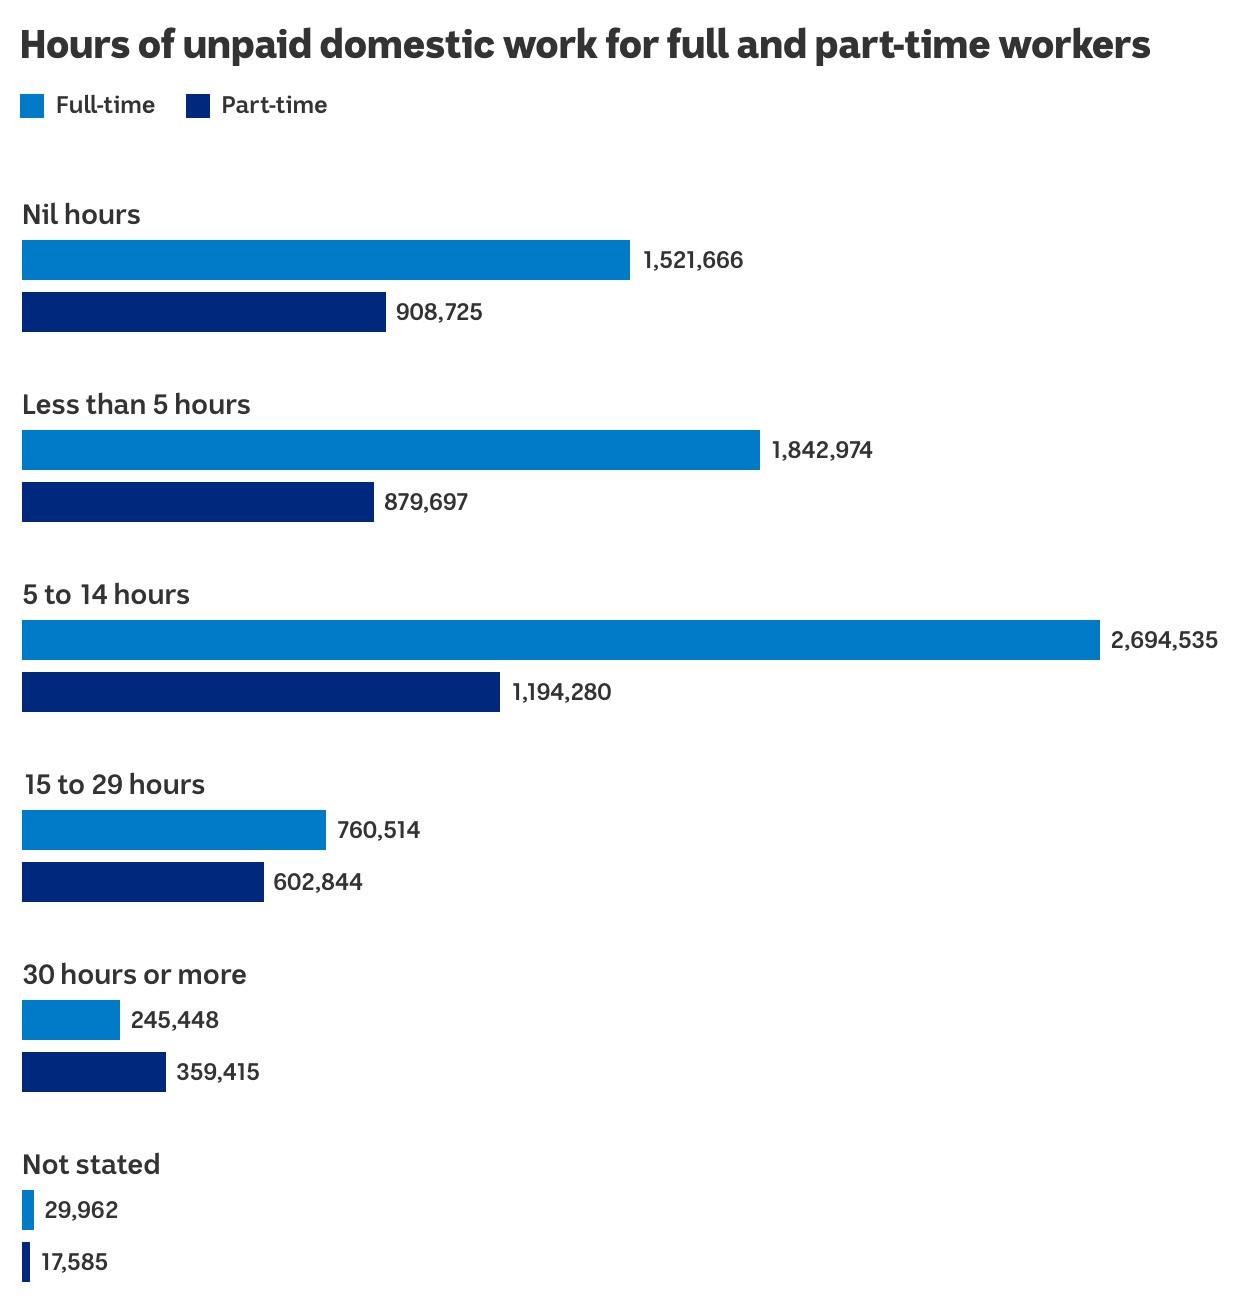 A graph shows hours of unpaid domestic work for full and part-time workers